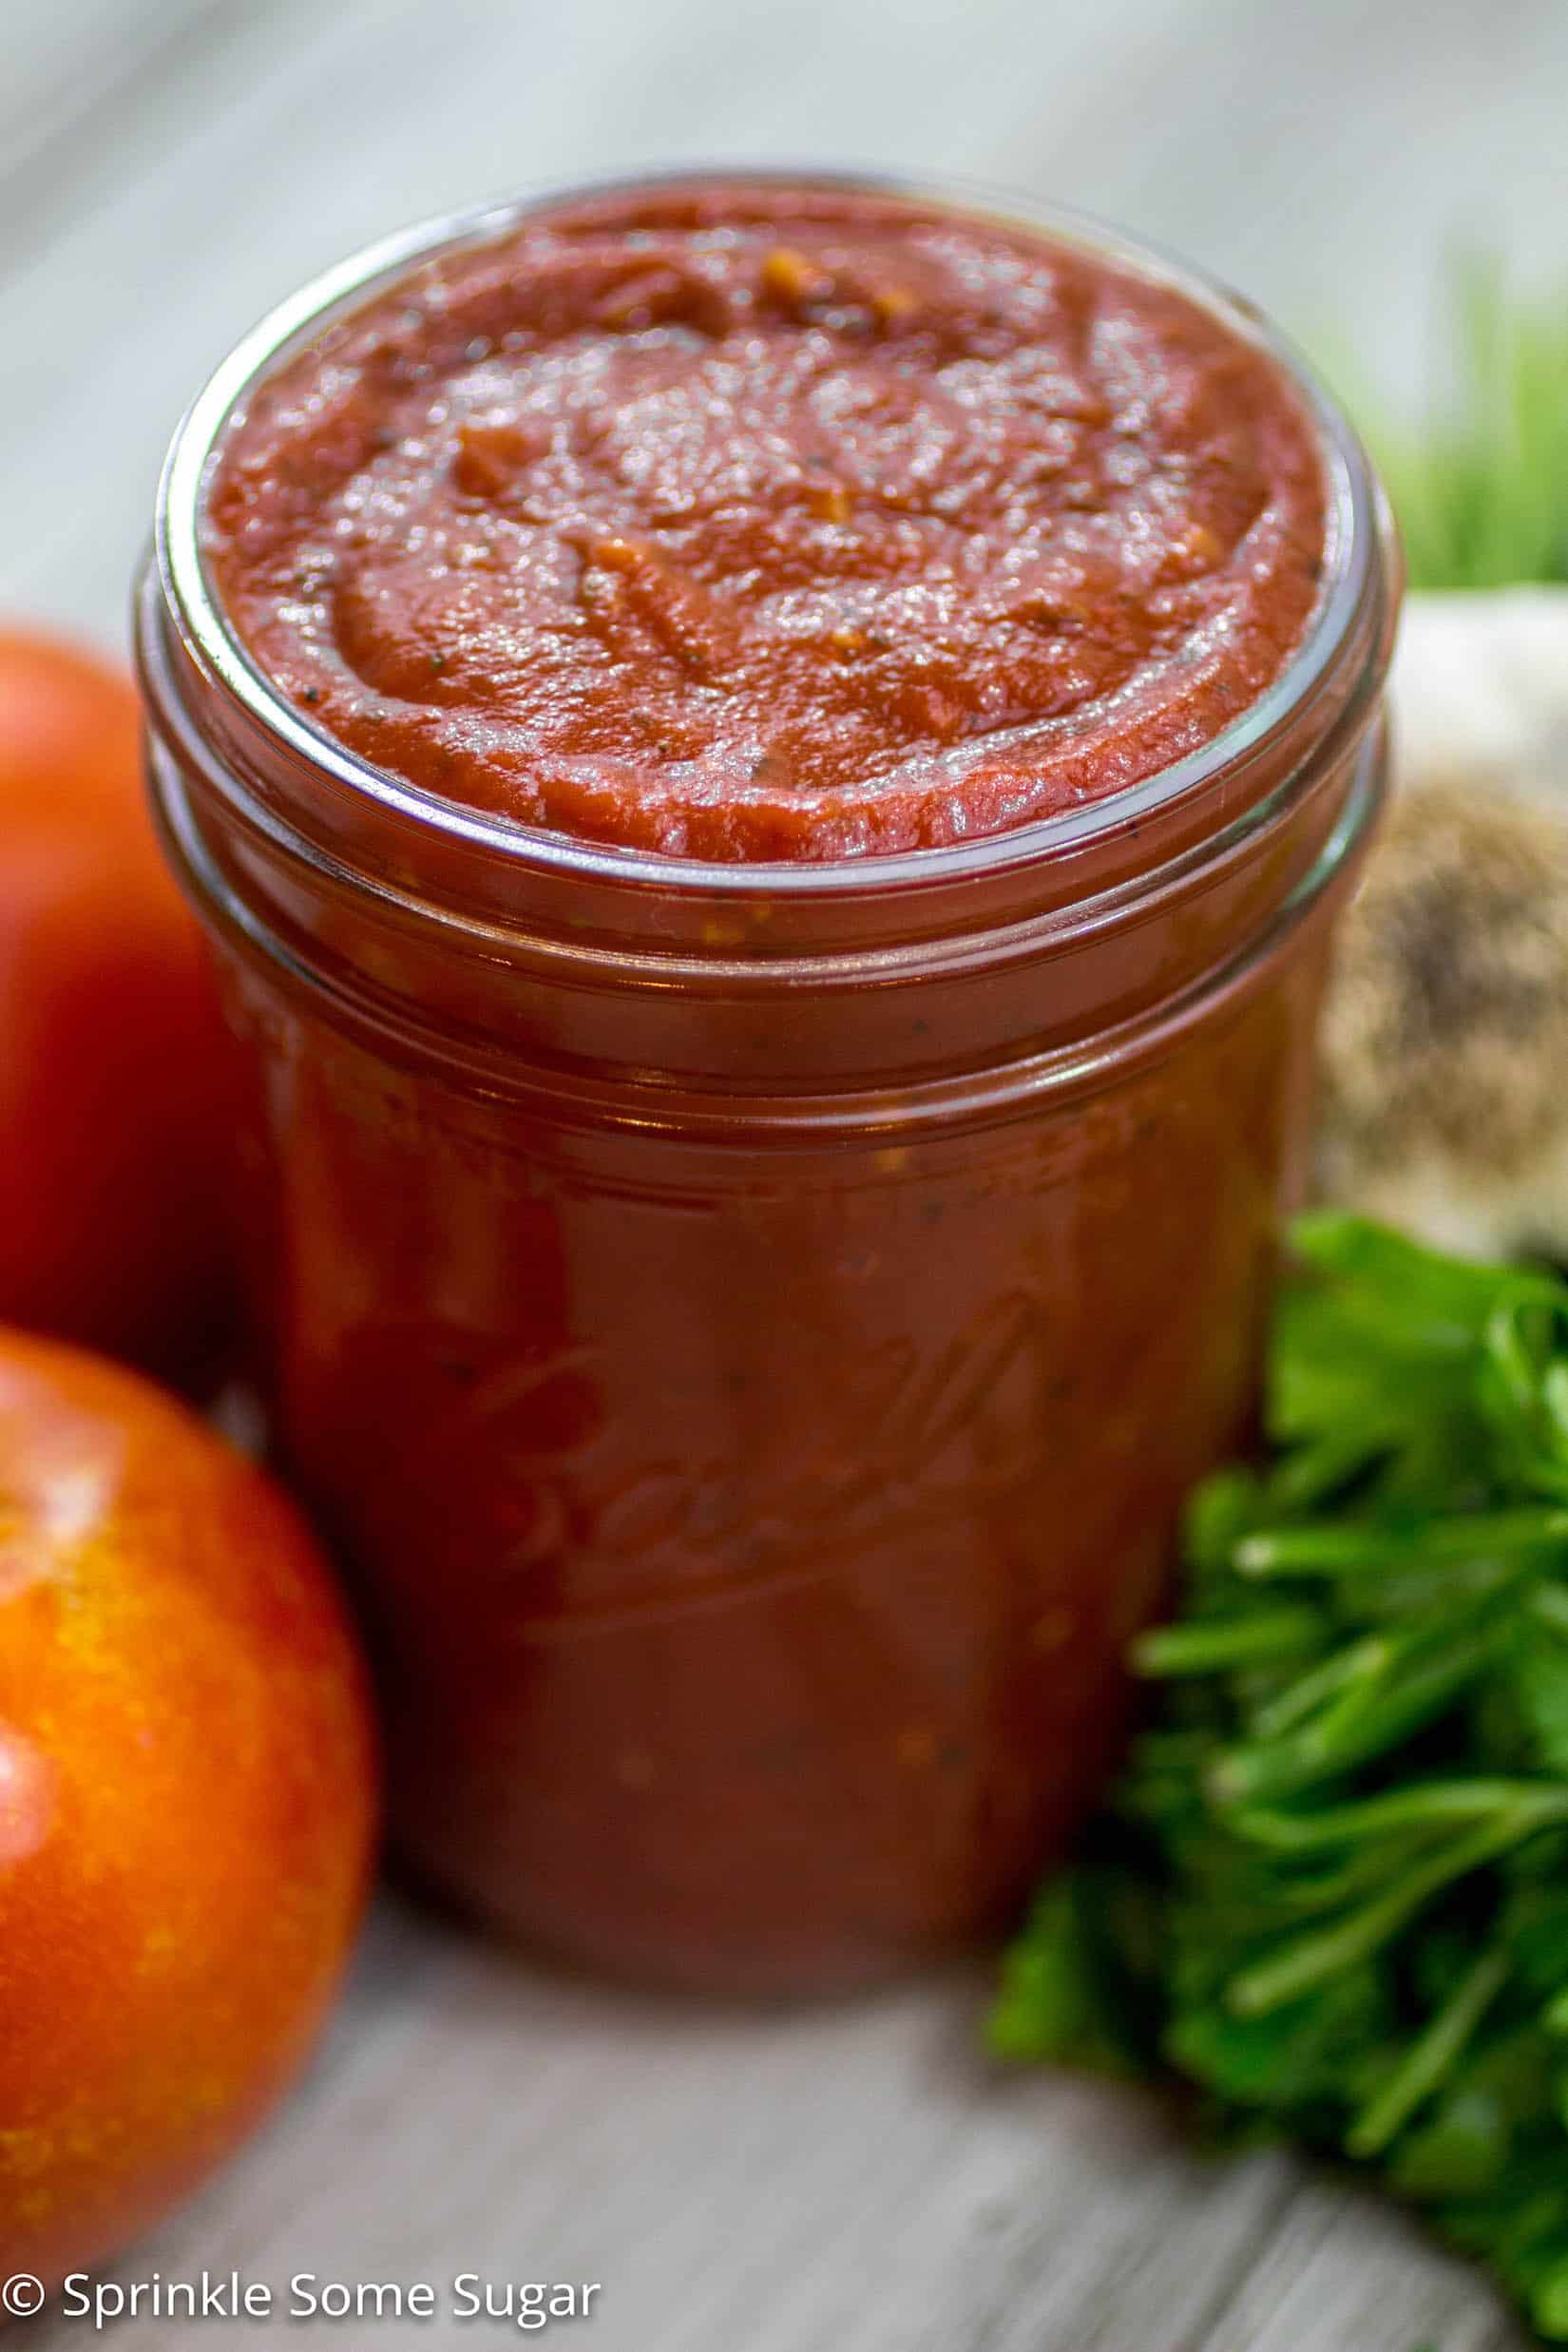 The BEST Homemade Pizza Sauce - The most delicious and tasty homemade pizza sauce!